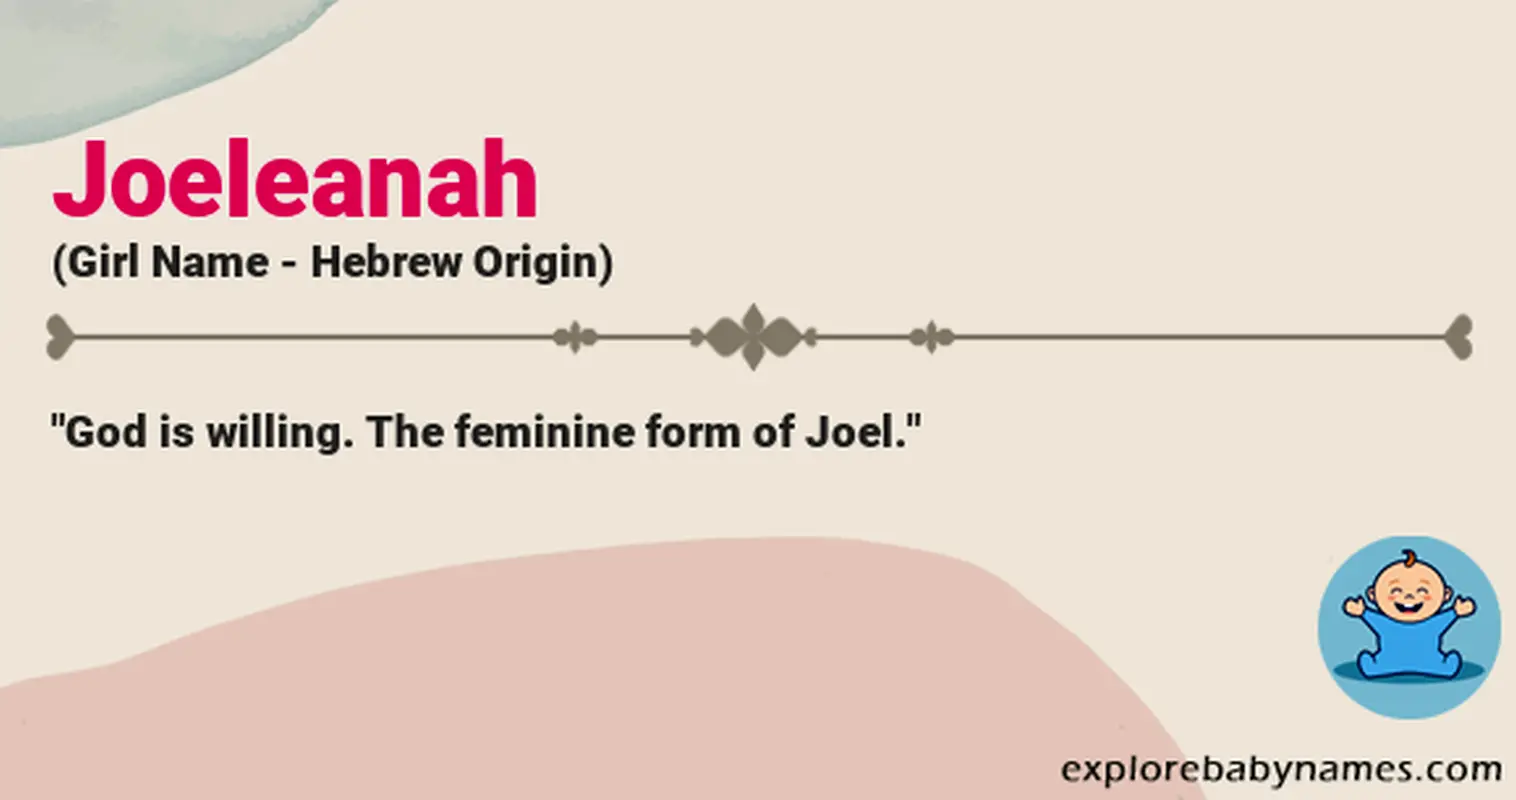 Meaning of Joeleanah